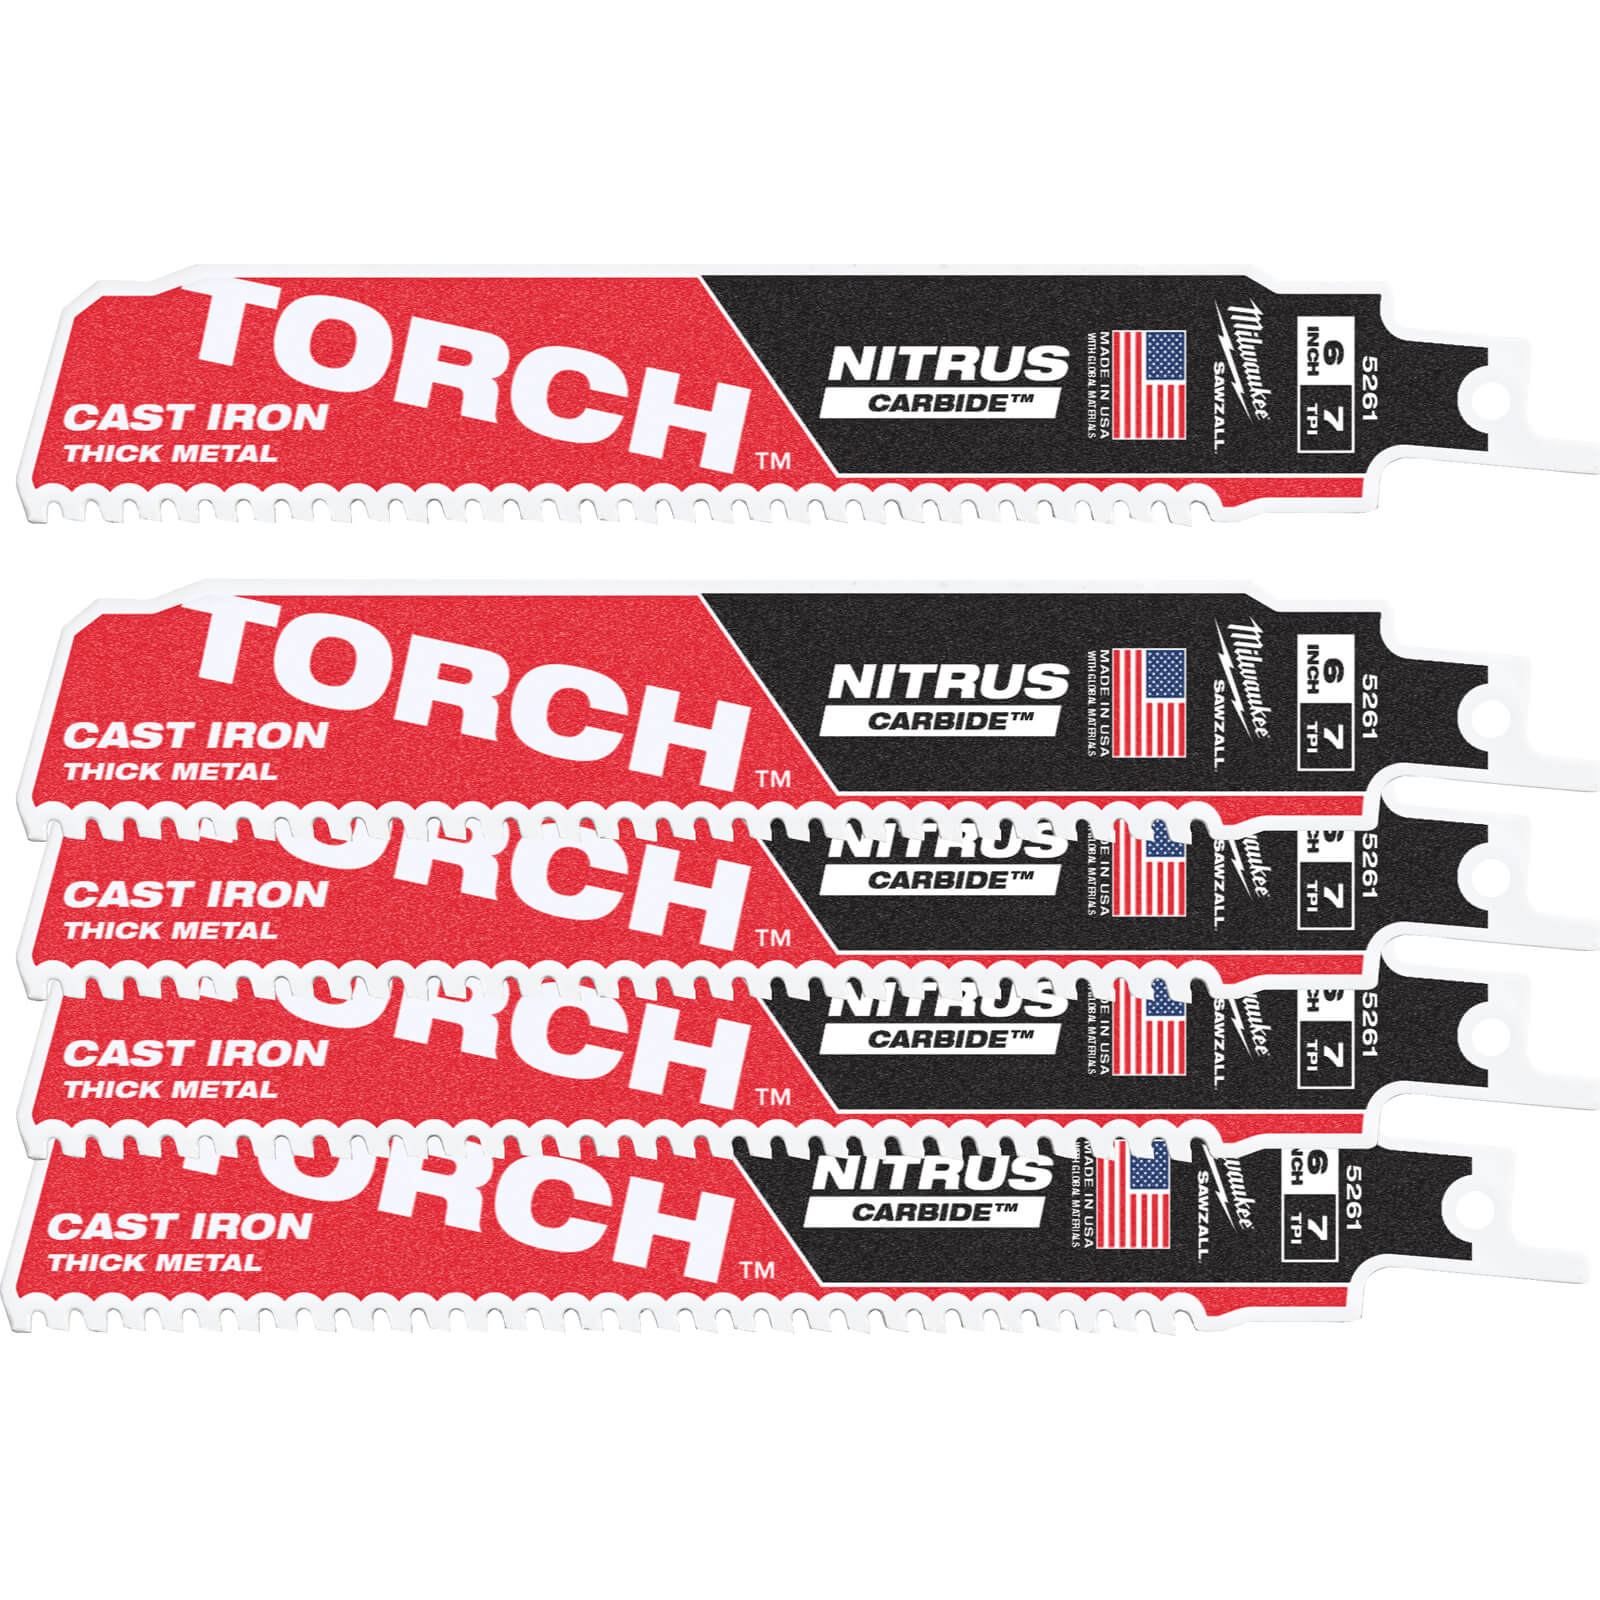 Image of Milwaukee Heavy Duty TORCH Nitrus Carbide Reciprocating Sabre Saw Blades 150mm Pack of 5